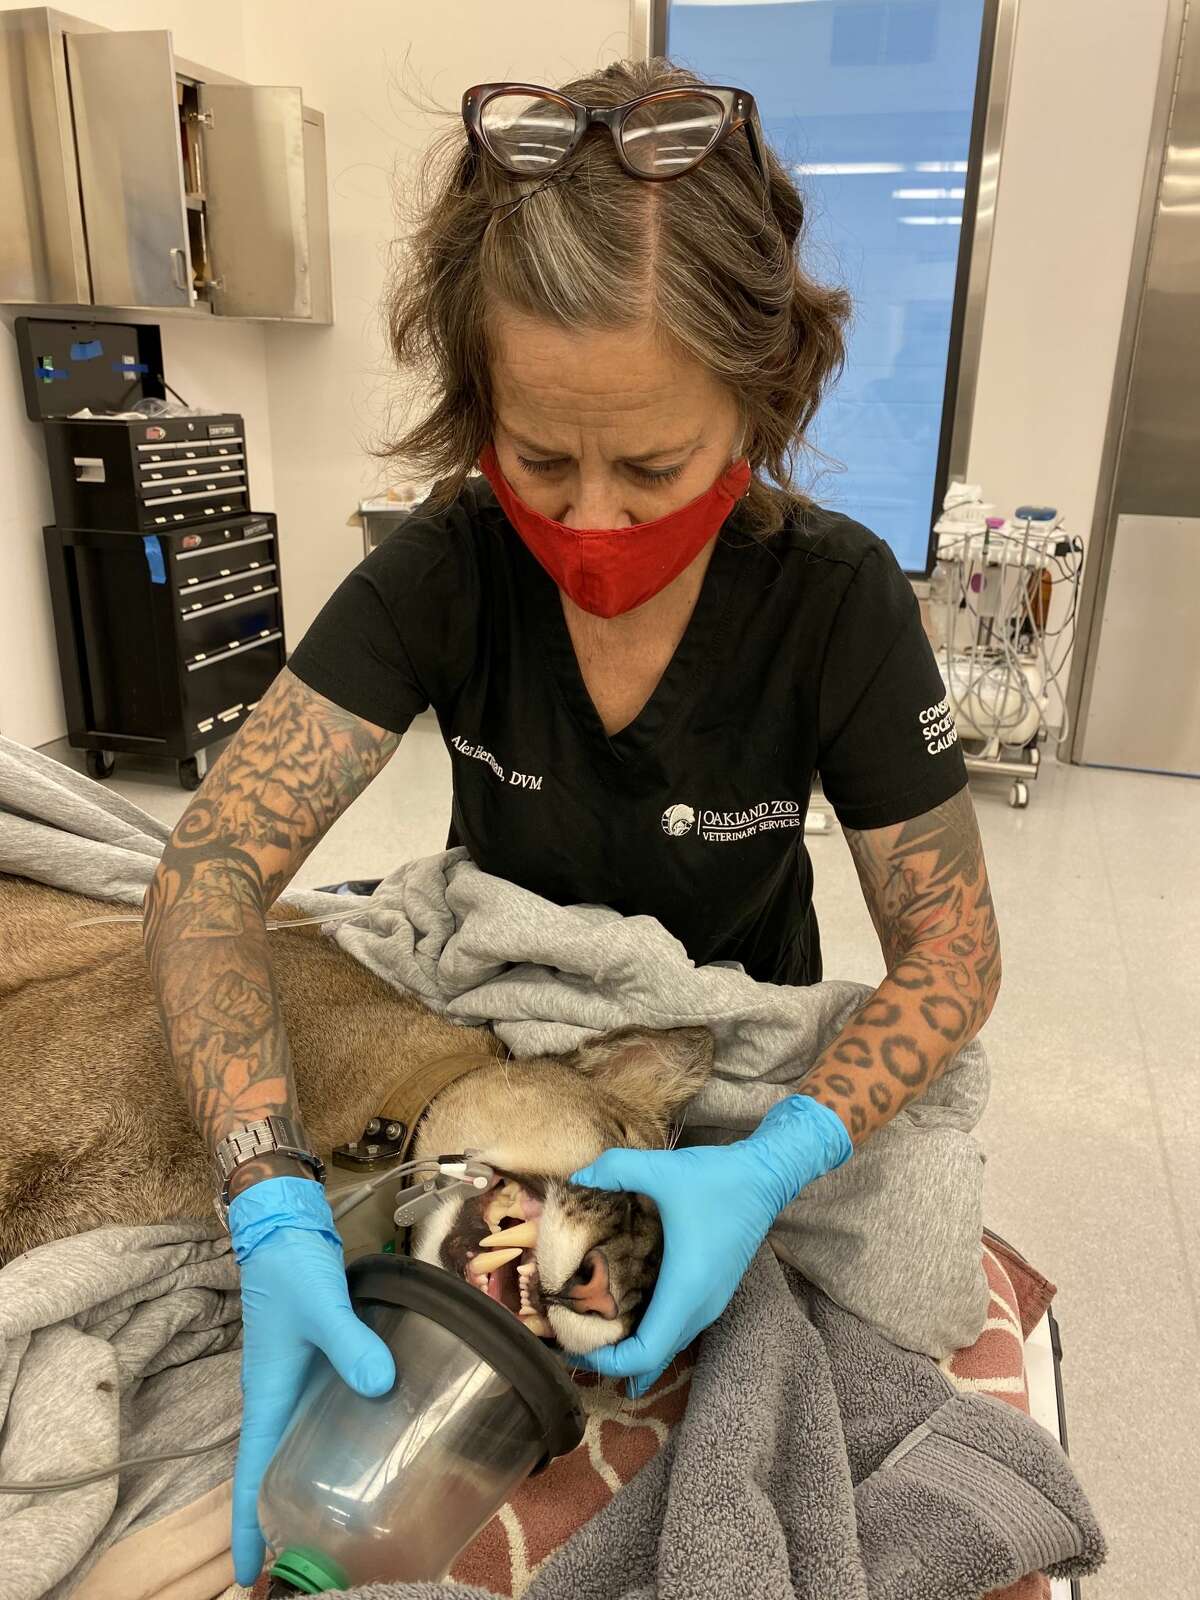 Shortly after midnight last night, Oakland Zoo took in a 2-year-old male Mountain lion captured in San Francisco’s Bernal Heights neighborhood. This male marks the 16th mountain lion rescue for the Zoo through their Bay Area Cougar Action Team (BACAT) alliance.